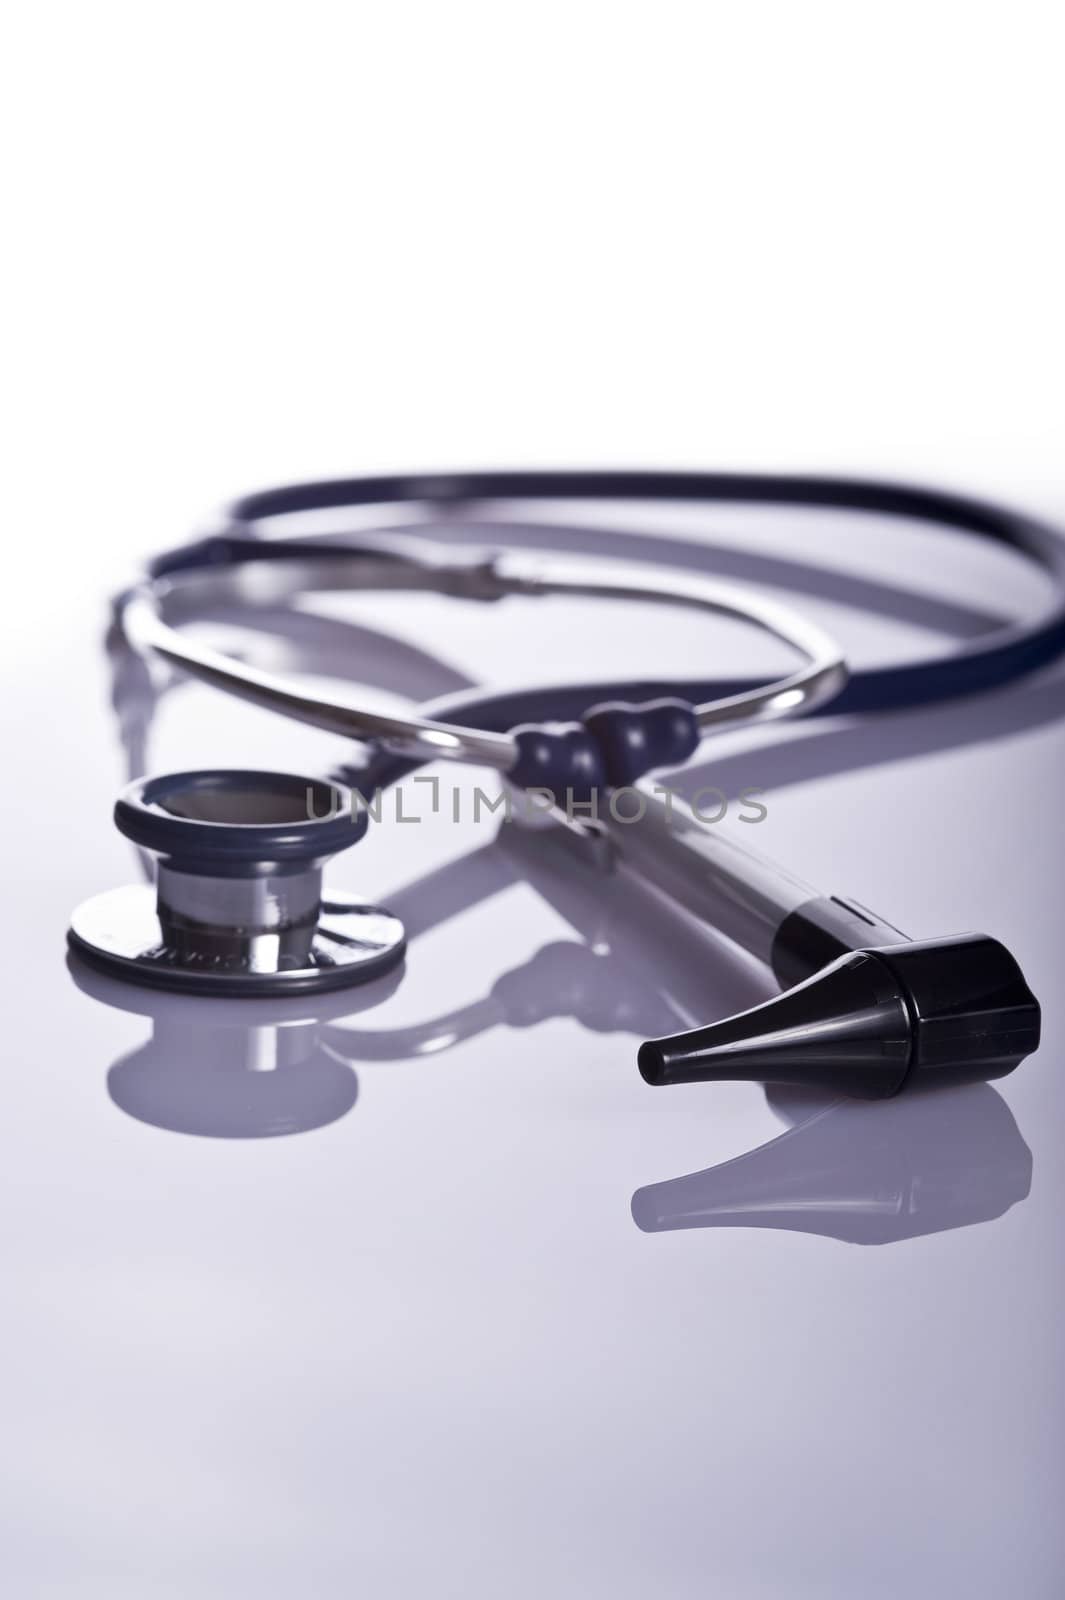 stethoscope and otoscope by tiptoee